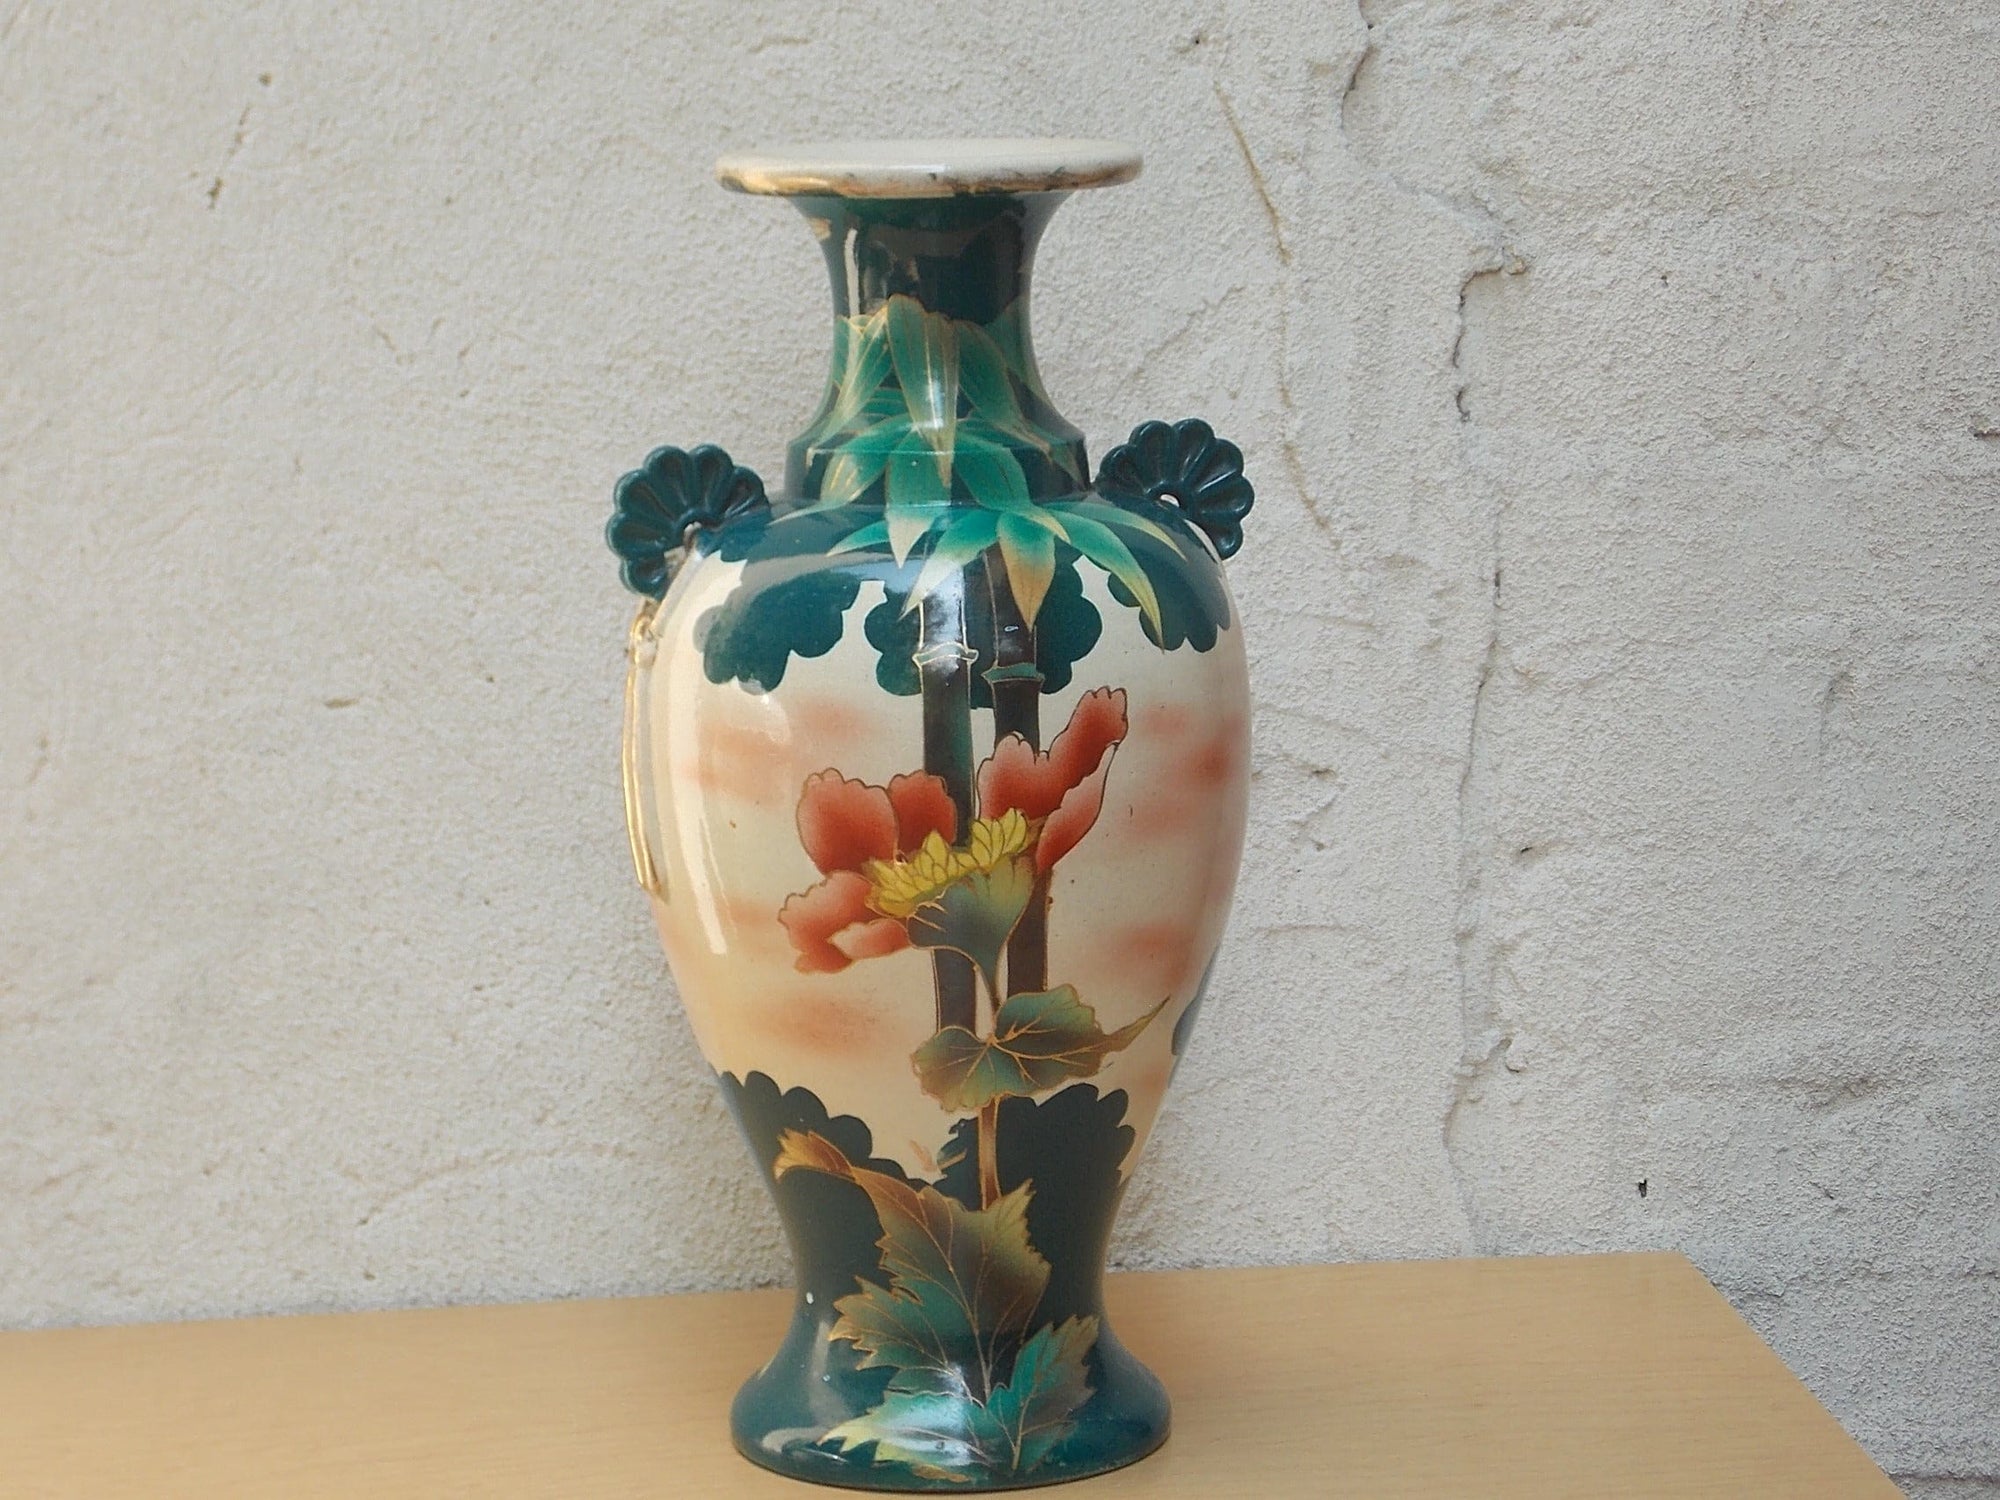 I Like Mike's Mid Century Modern Wall Decor & Art Large Green & White Floral Gilded Urn Vase with Pink, Purple & Orange